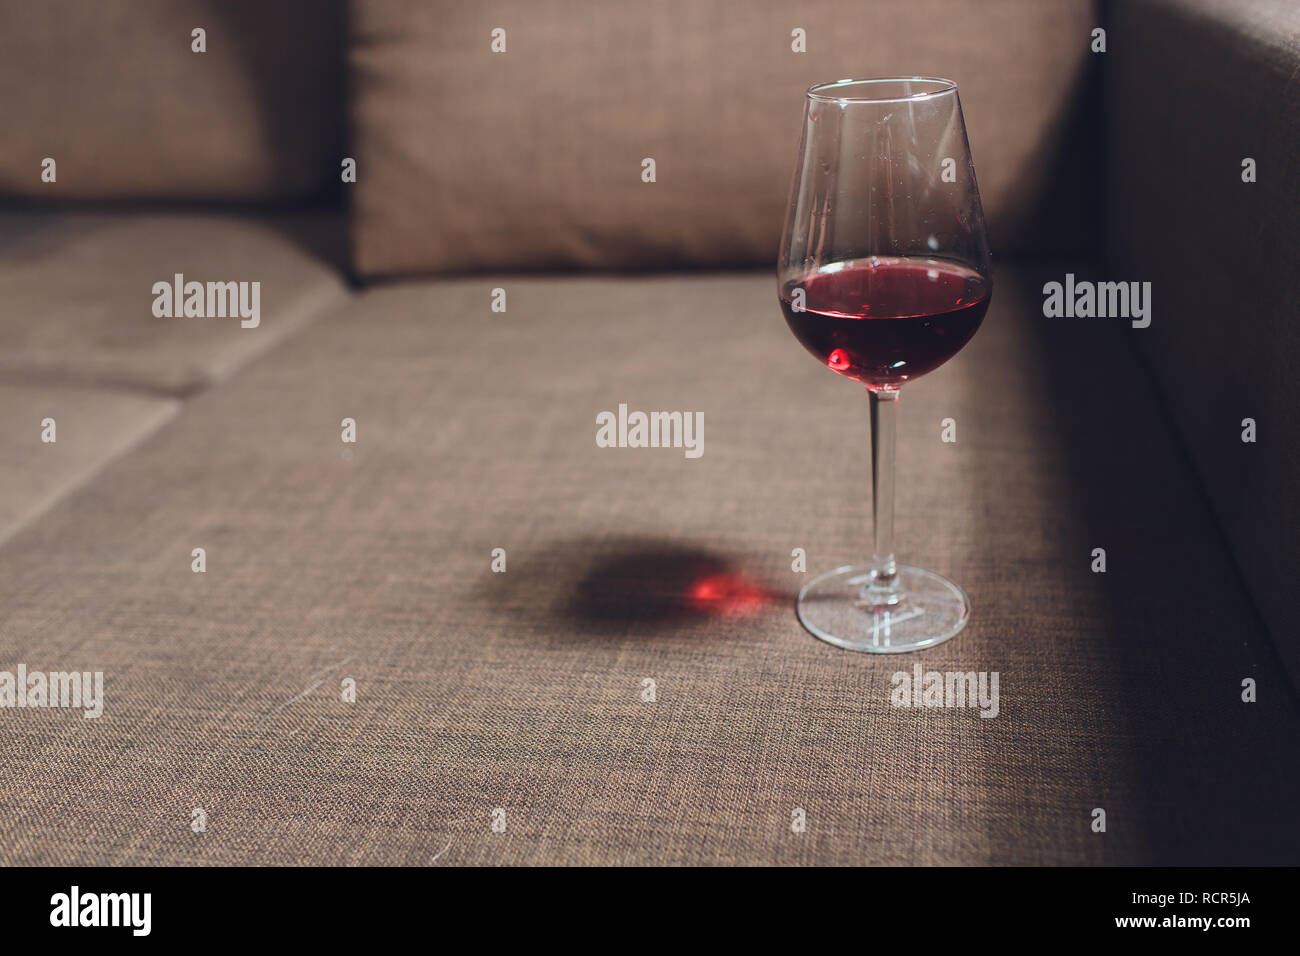 Red wine spilled on a grey couch sofa Stock Photo - Alamy